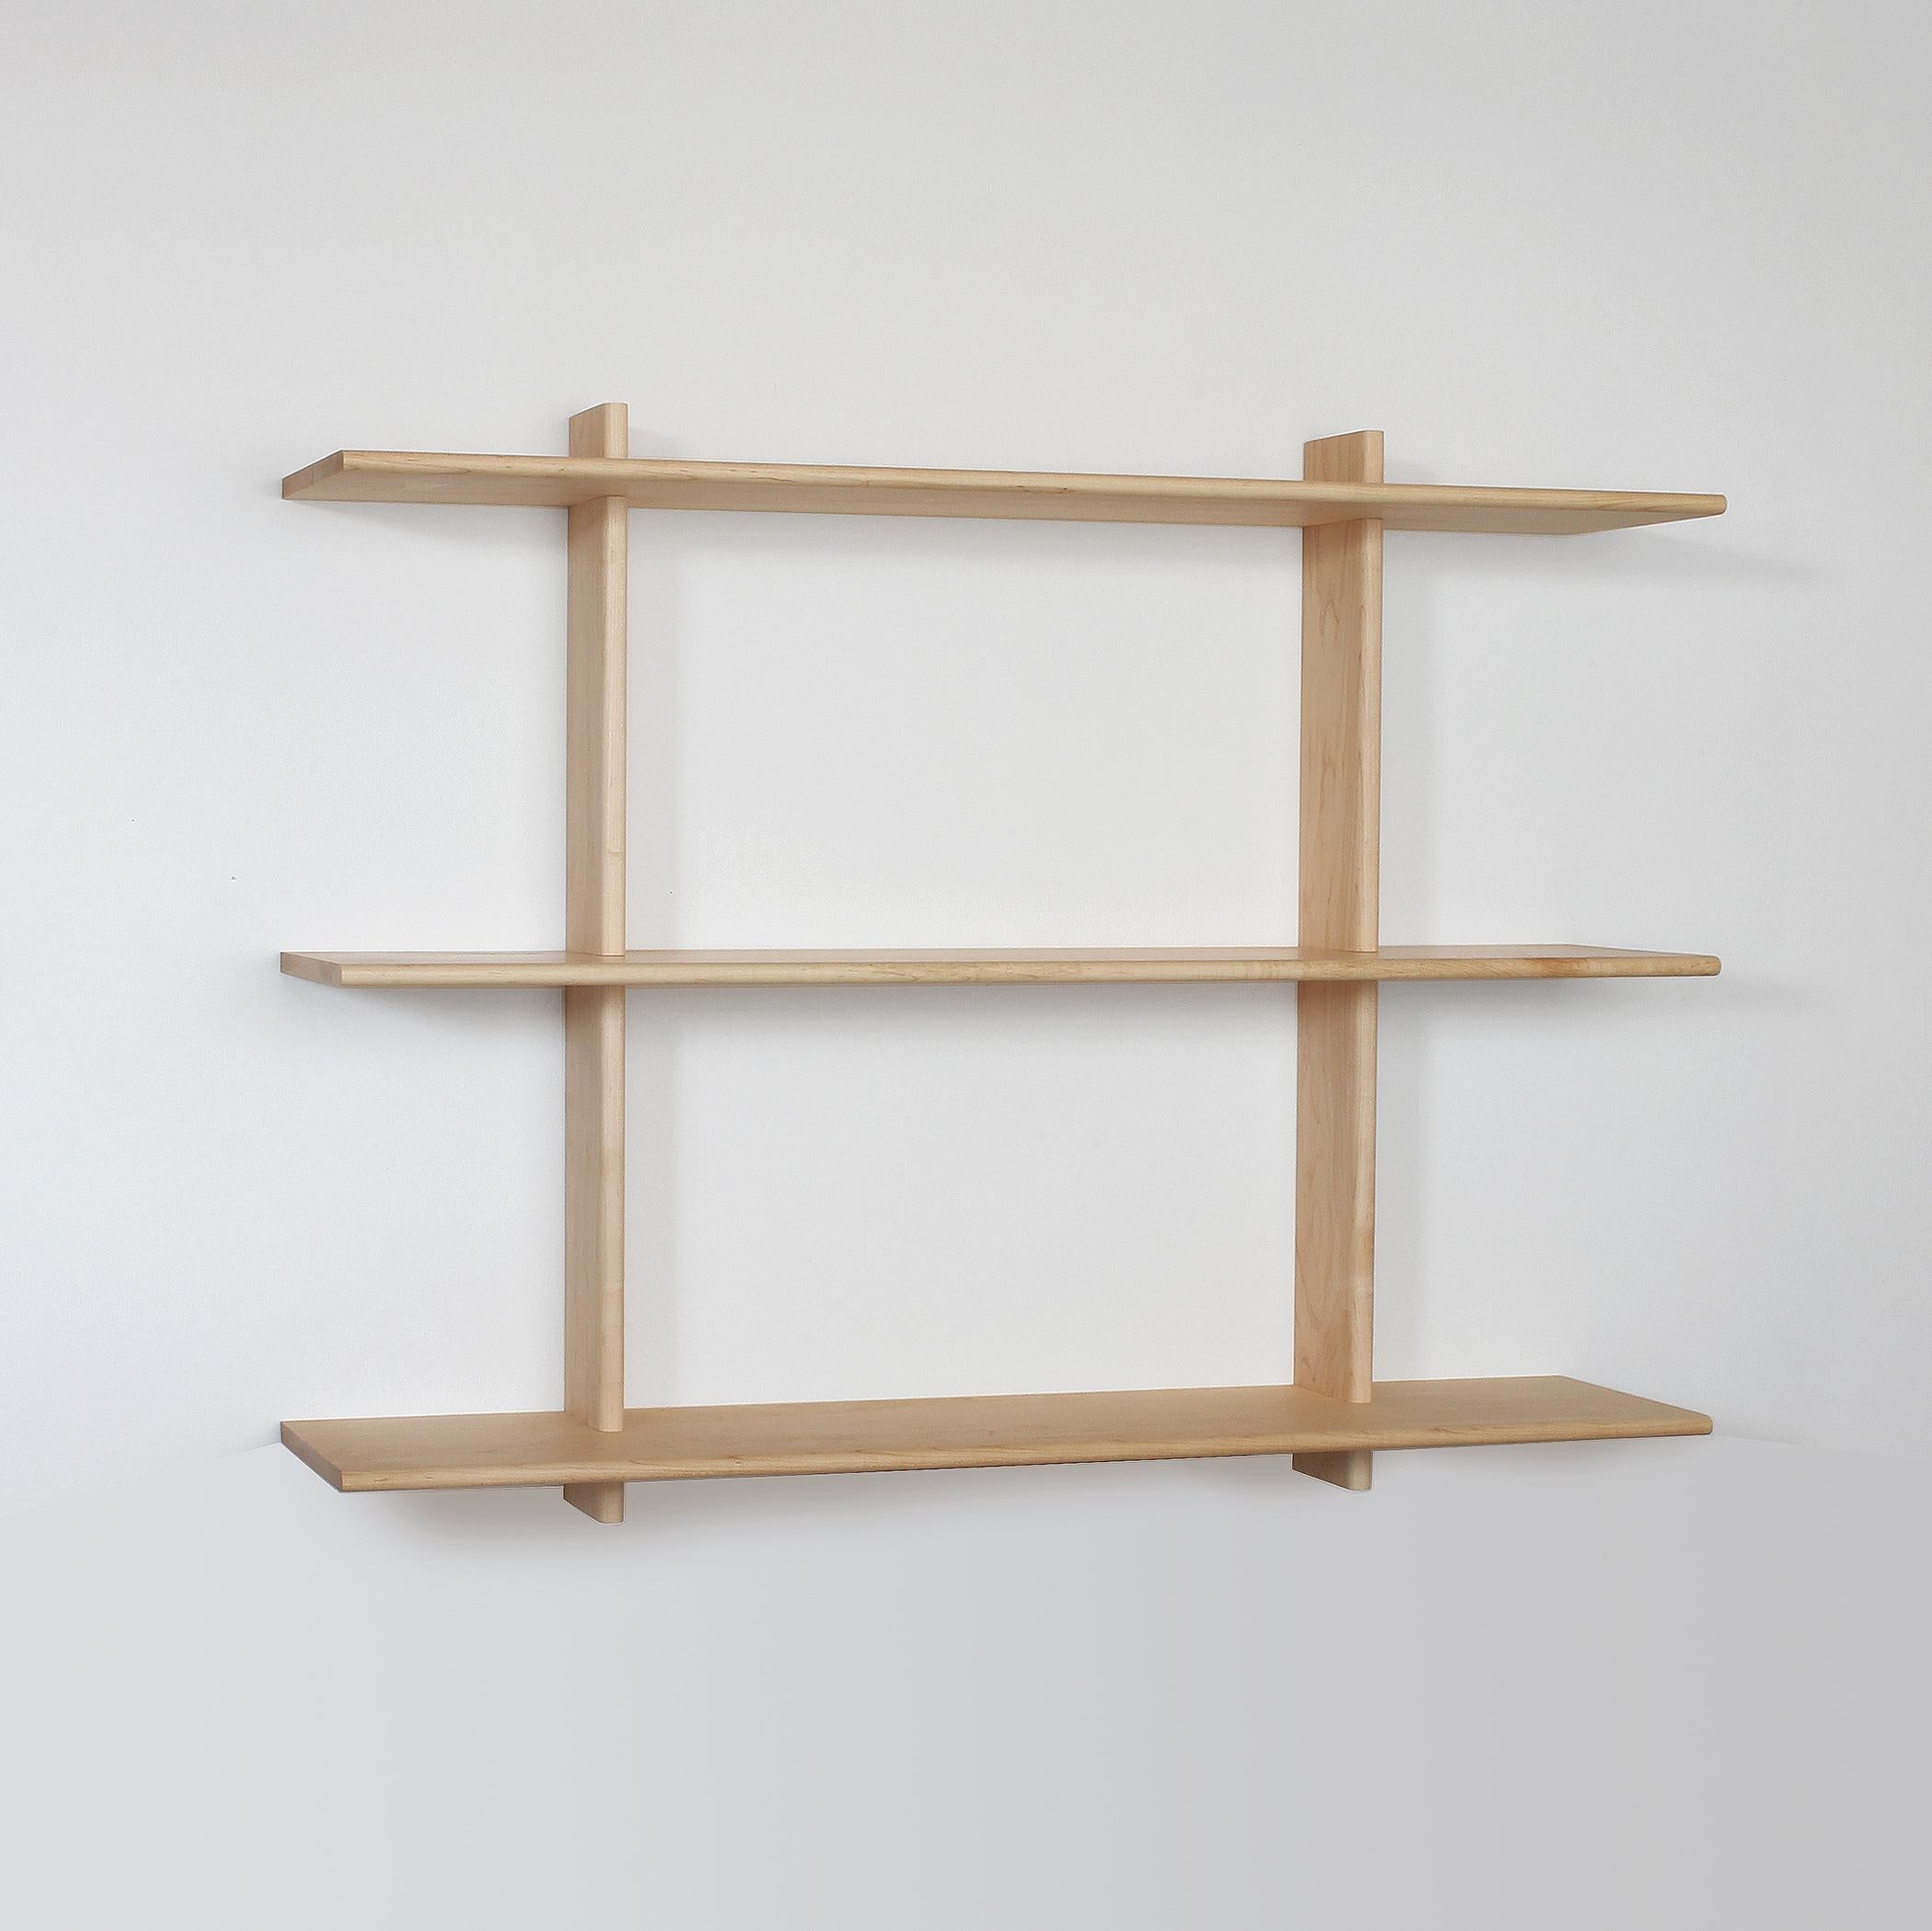 Solid maple shelving unit that hangs from wall and ready to ship. Installation instructions and hardware included. The vertical frames attach to the wall and have slots that precisely hold the deep shelves in place. Rounded edges add visual